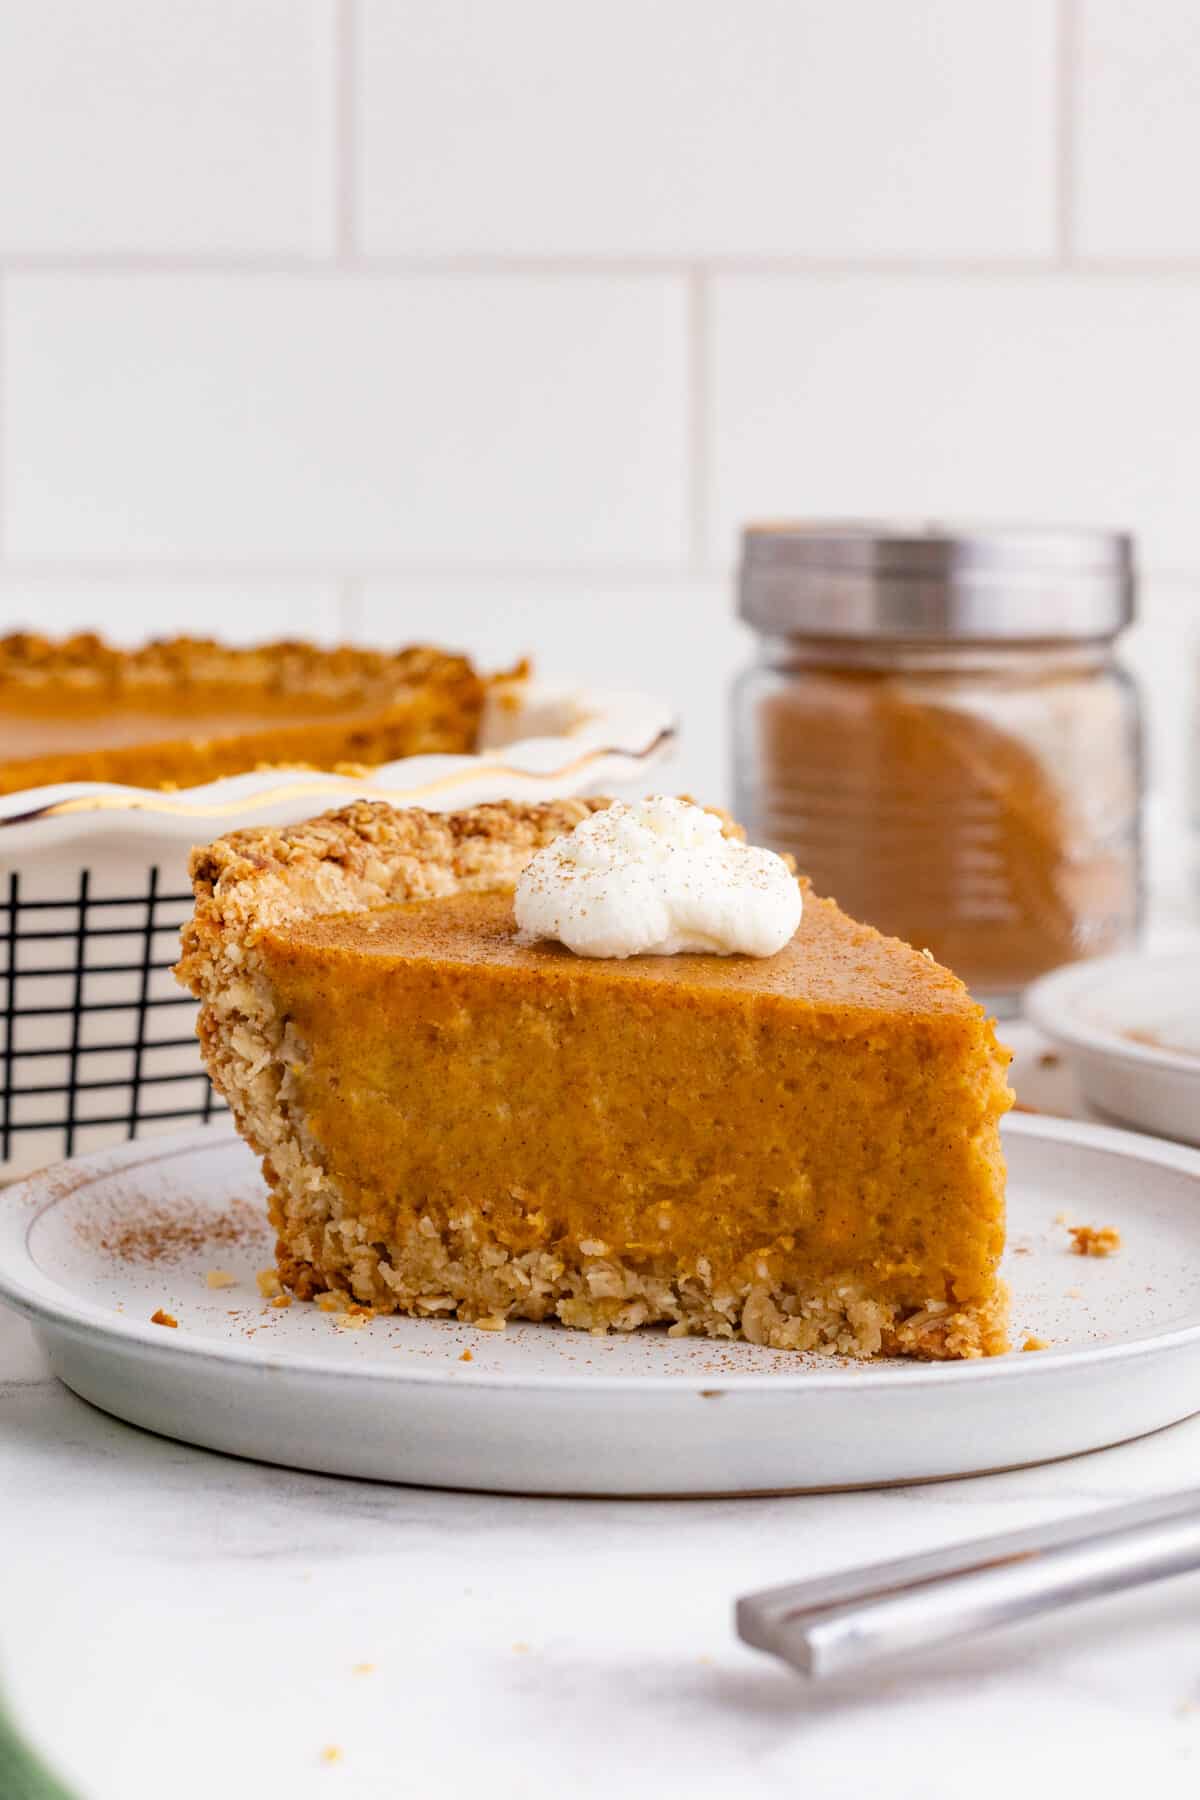 a slice of sweet potato pie on a plate with whip cream on top and the full pie and jar of cinnamon in the background